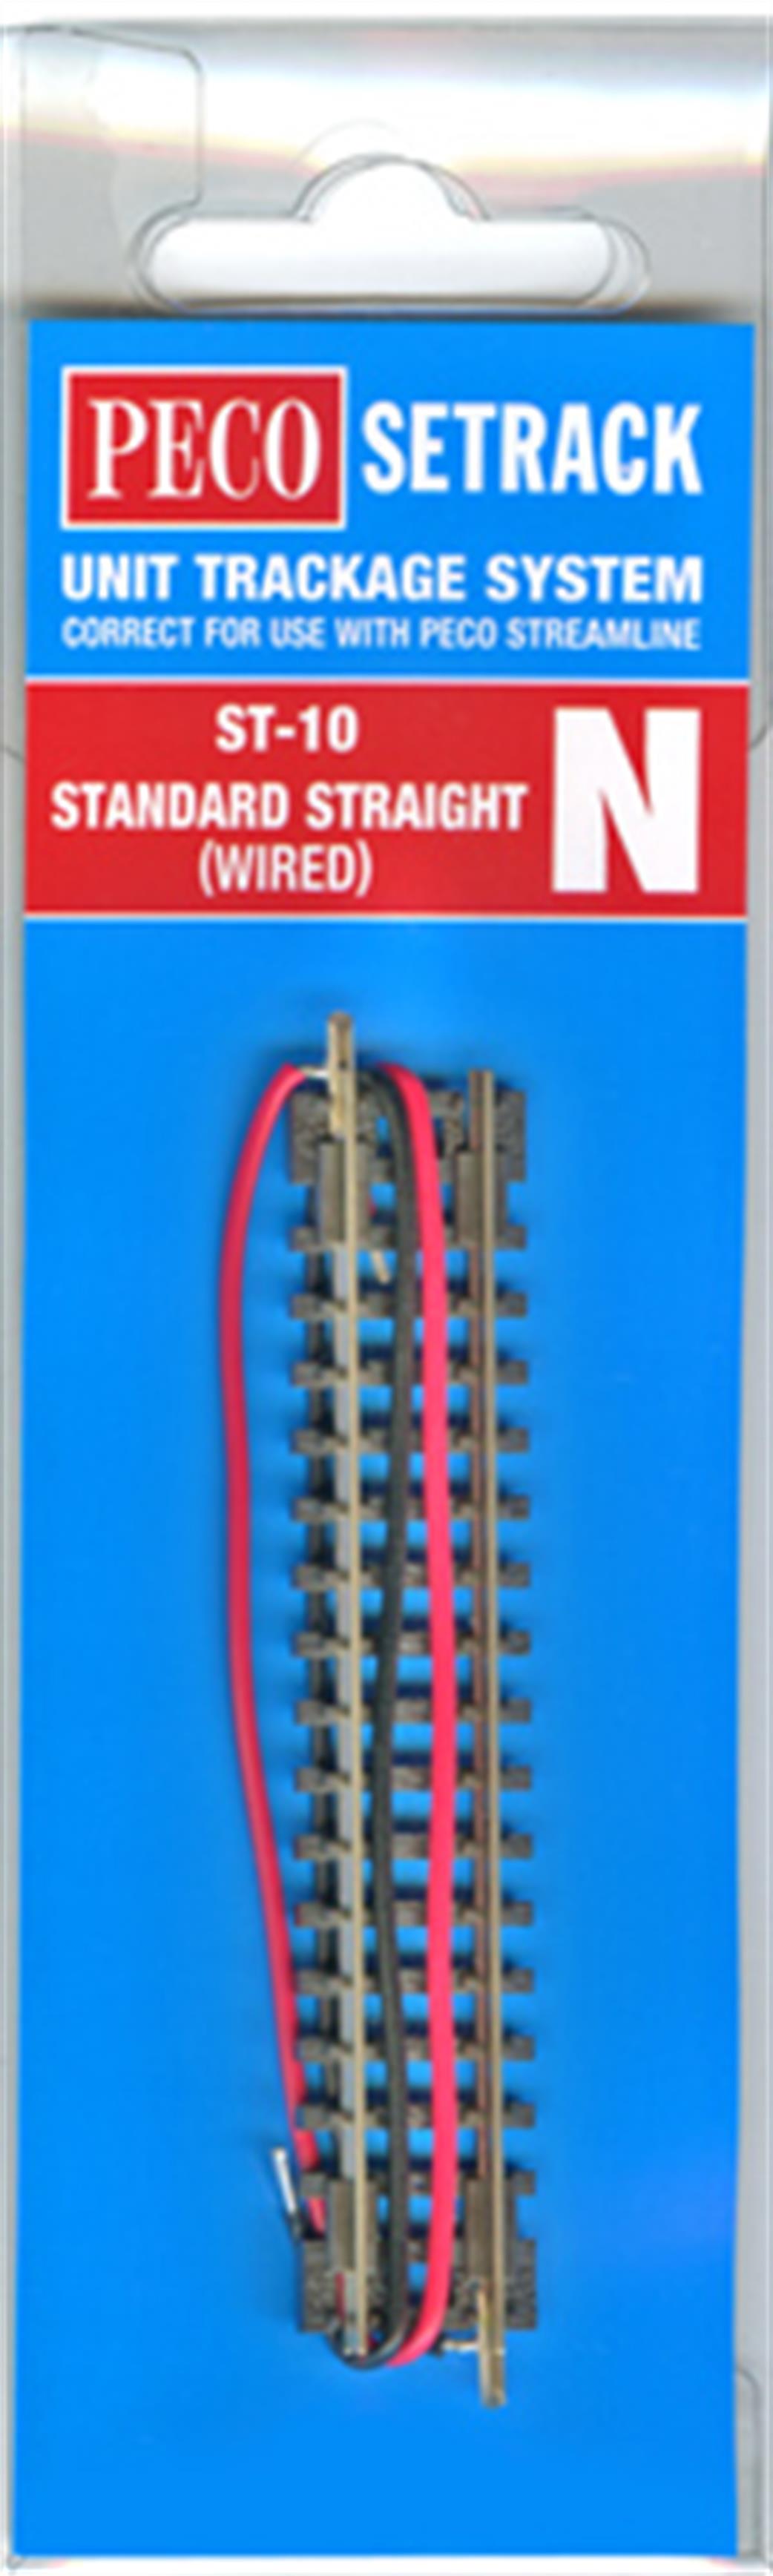 Peco N ST-10 Setrack Power Connection Standard Straight